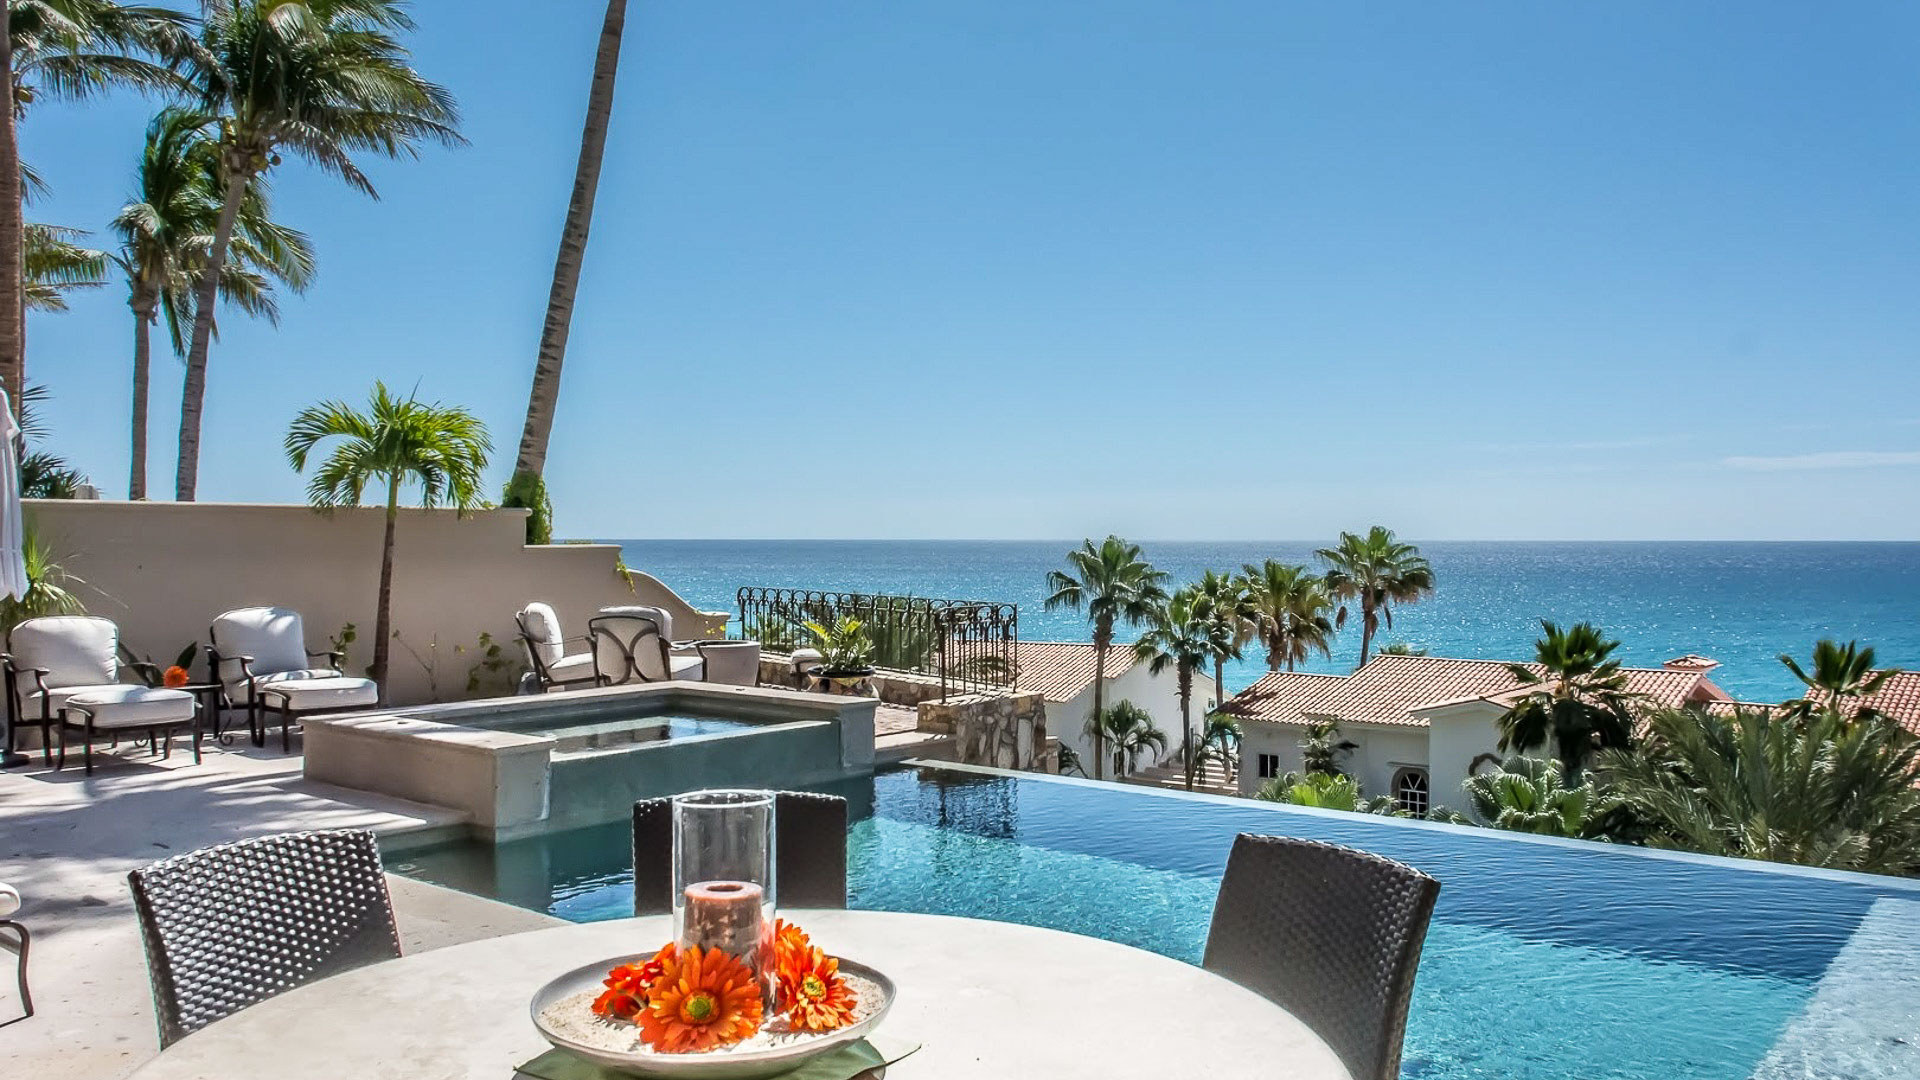 Property Image 2 - Magnificent Ocean View Cabo Villa with Pool and Tropical Gardens